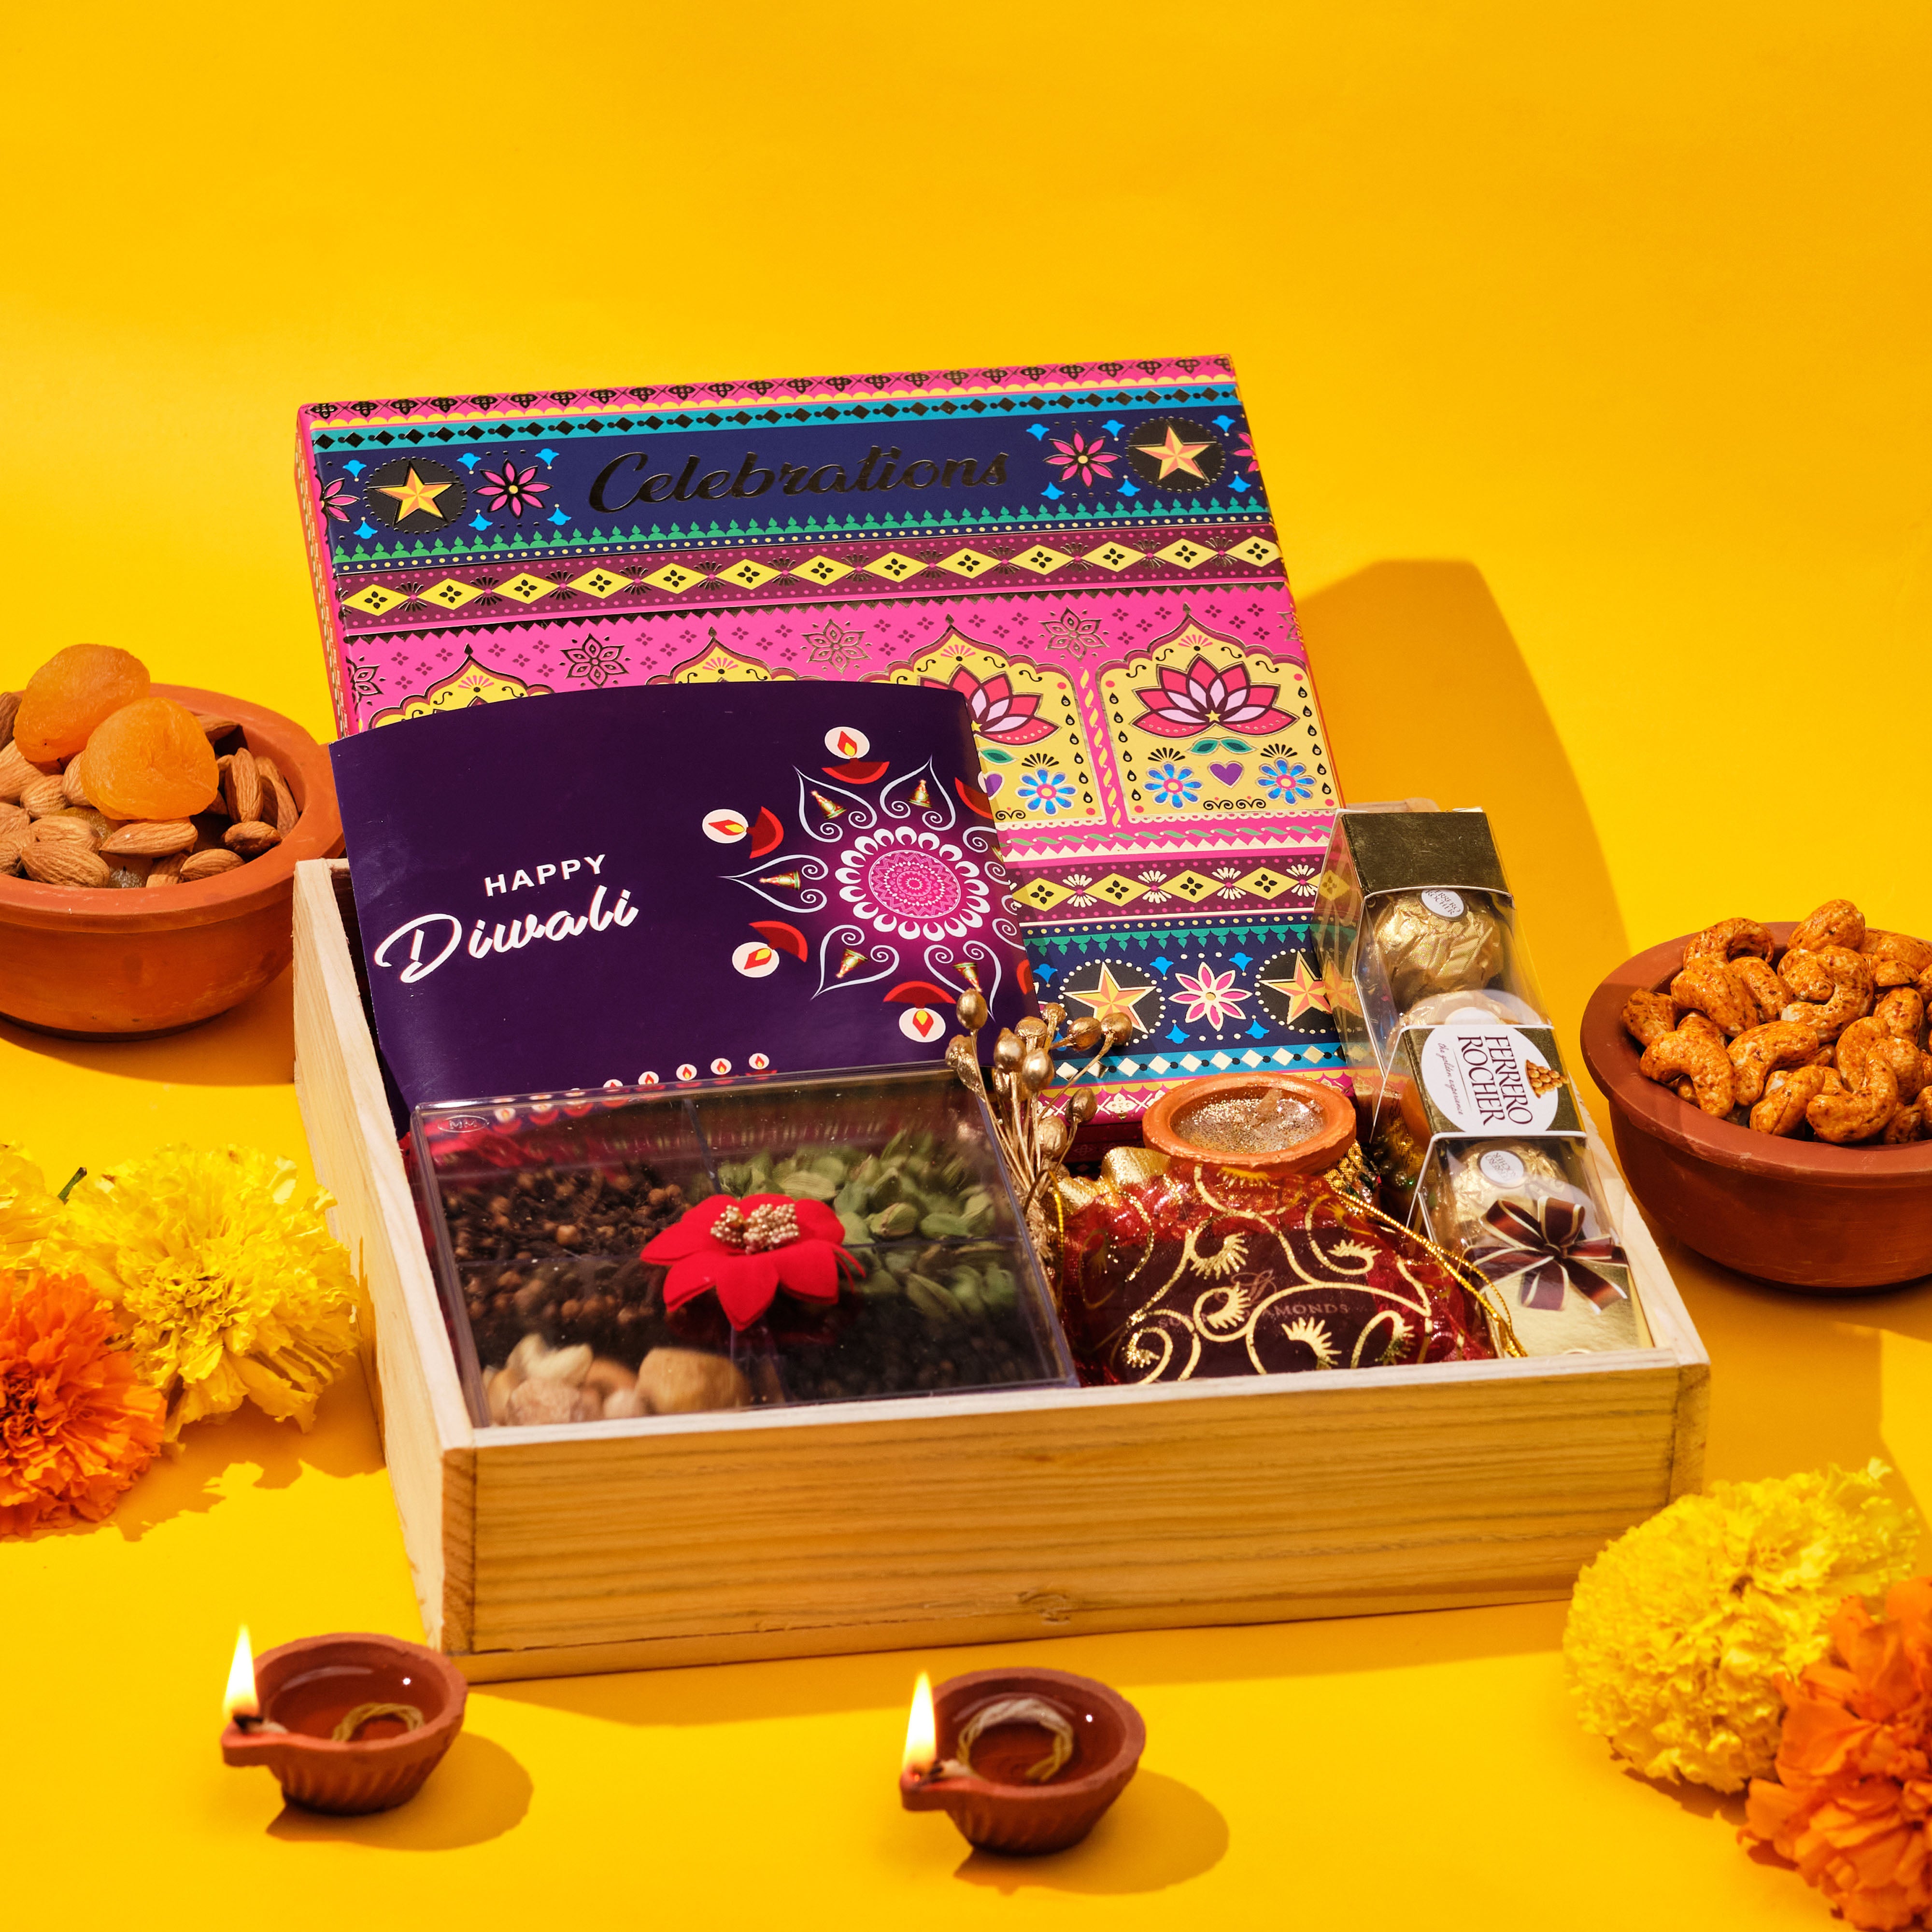 Sukhadia - Indian Sweets and Gifts